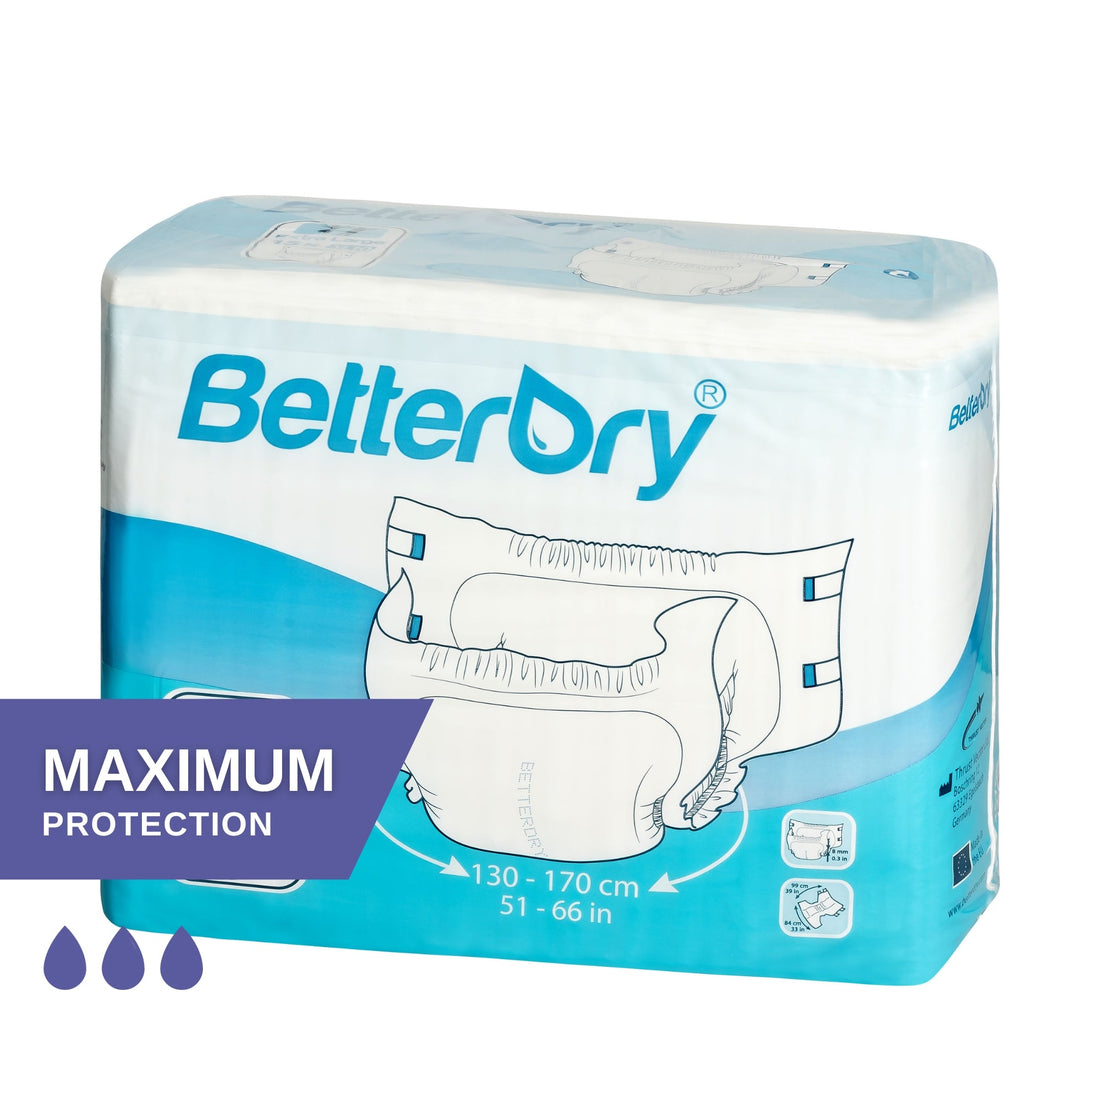 BetterDry 10 Adult Diapers